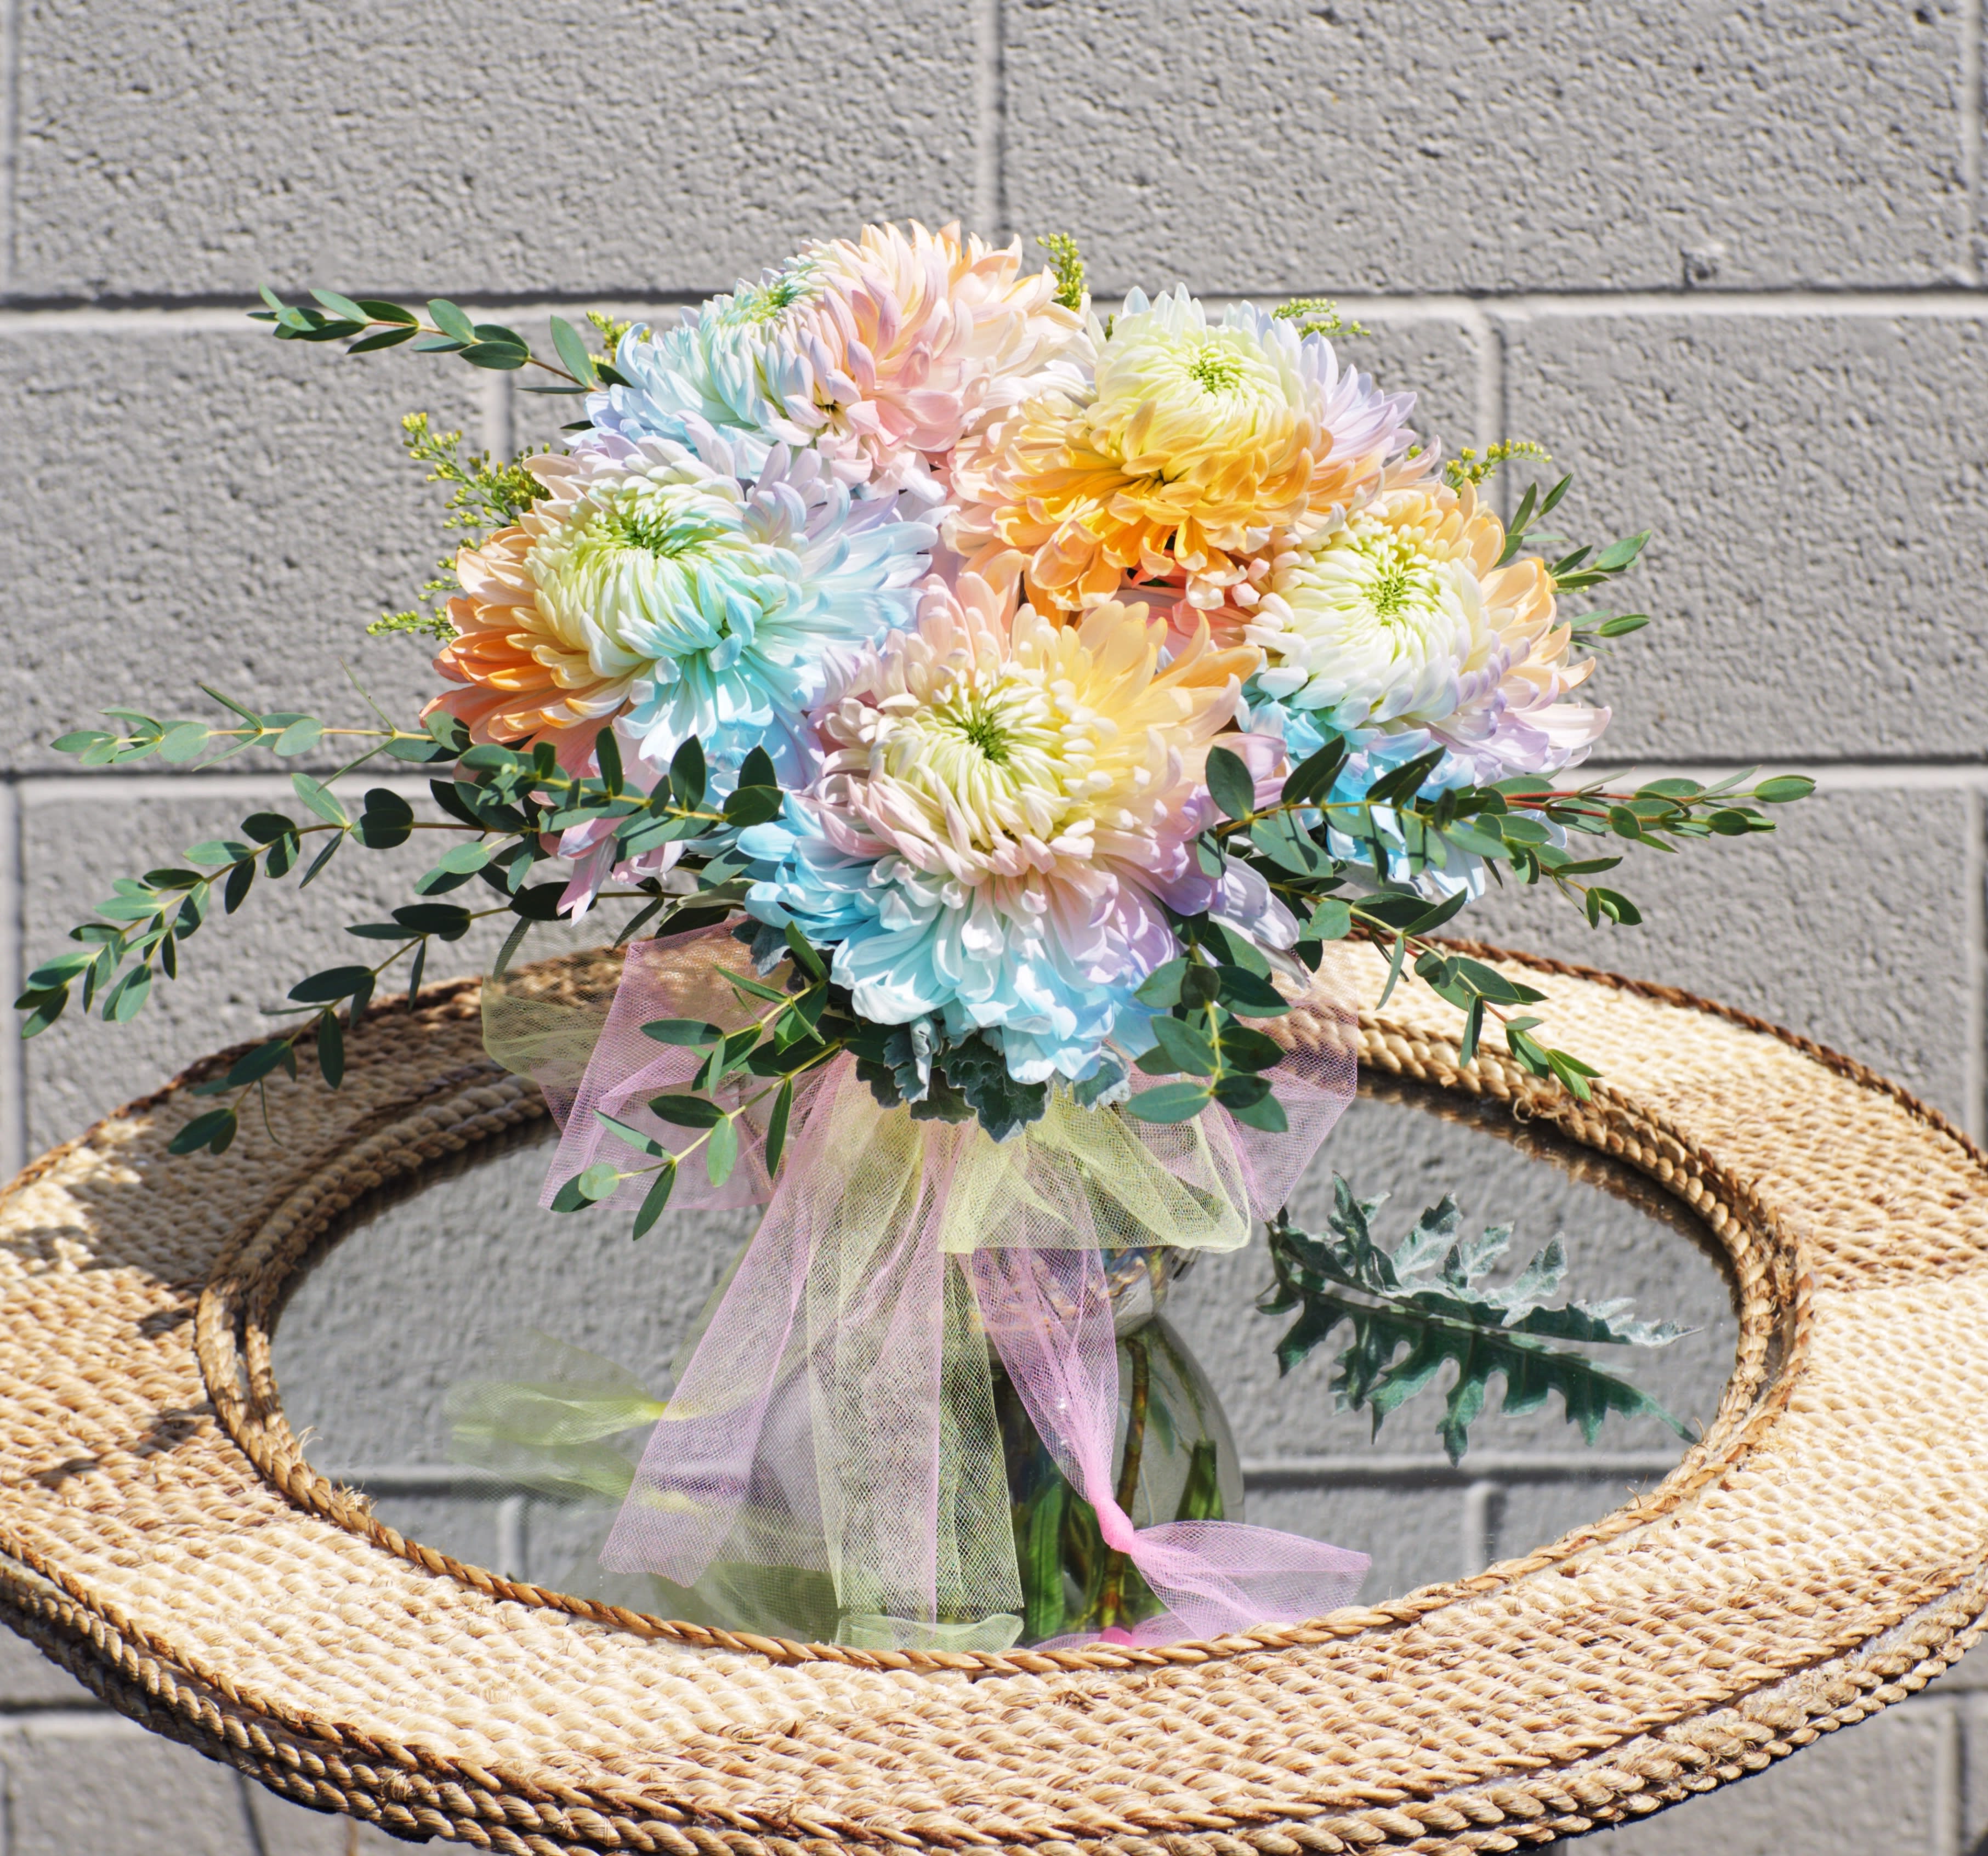 Sweet Life - Sweet like a candy, this design including rainbow blooms and nice accents is a good gift for all occasions. STANDARD: 5 BLOOMS DELUXE: 10 BLOOMS PREMIUM: 15 BLOOMS